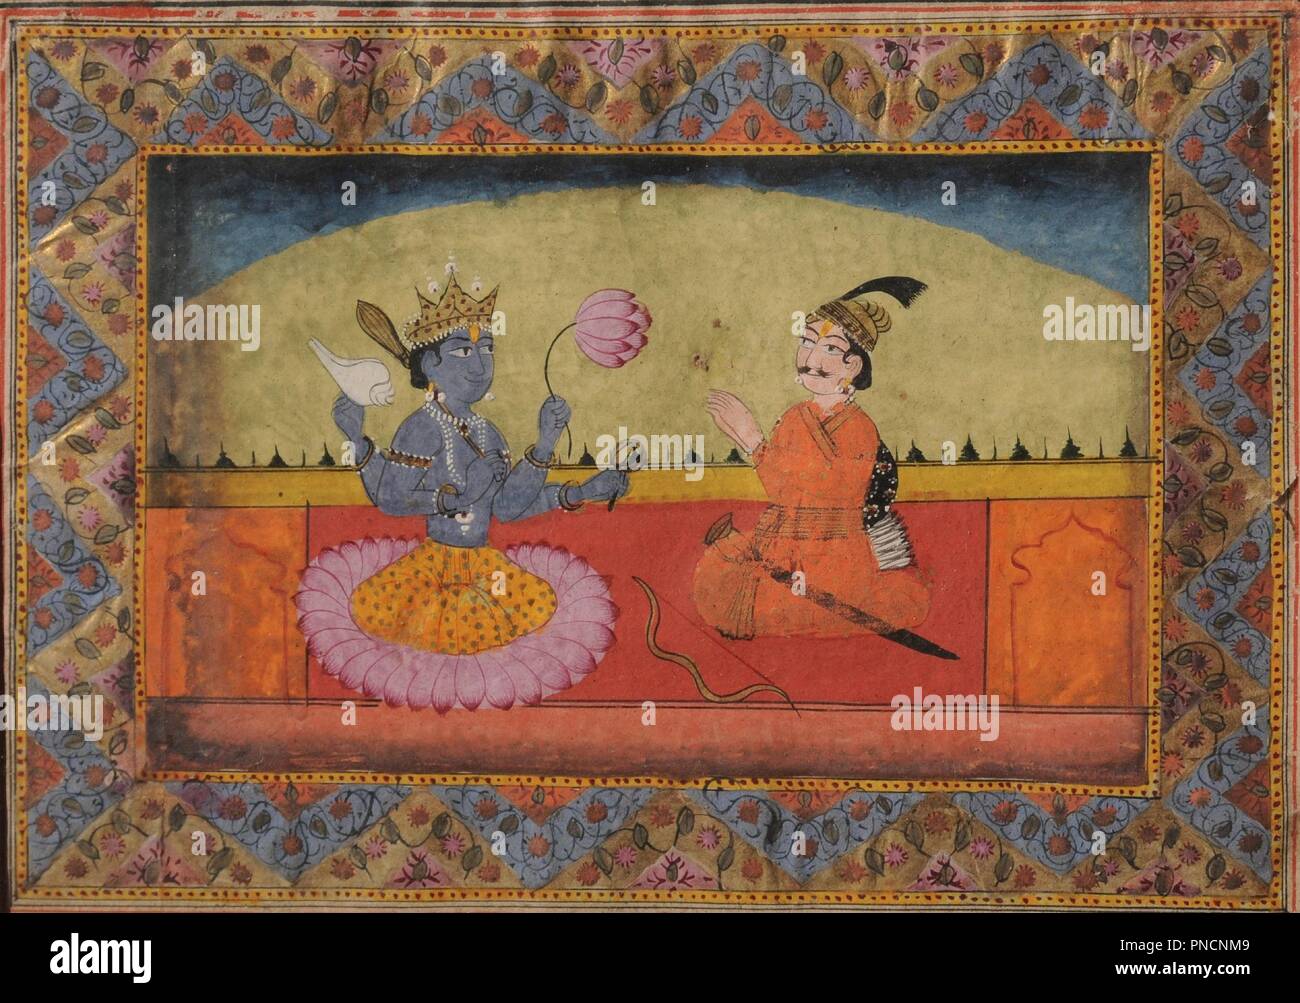 Raja Parikshit seated in front of Vishnu. Date/Period: Between 1801 and 1825. Author: UNKNOWN. Stock Photo